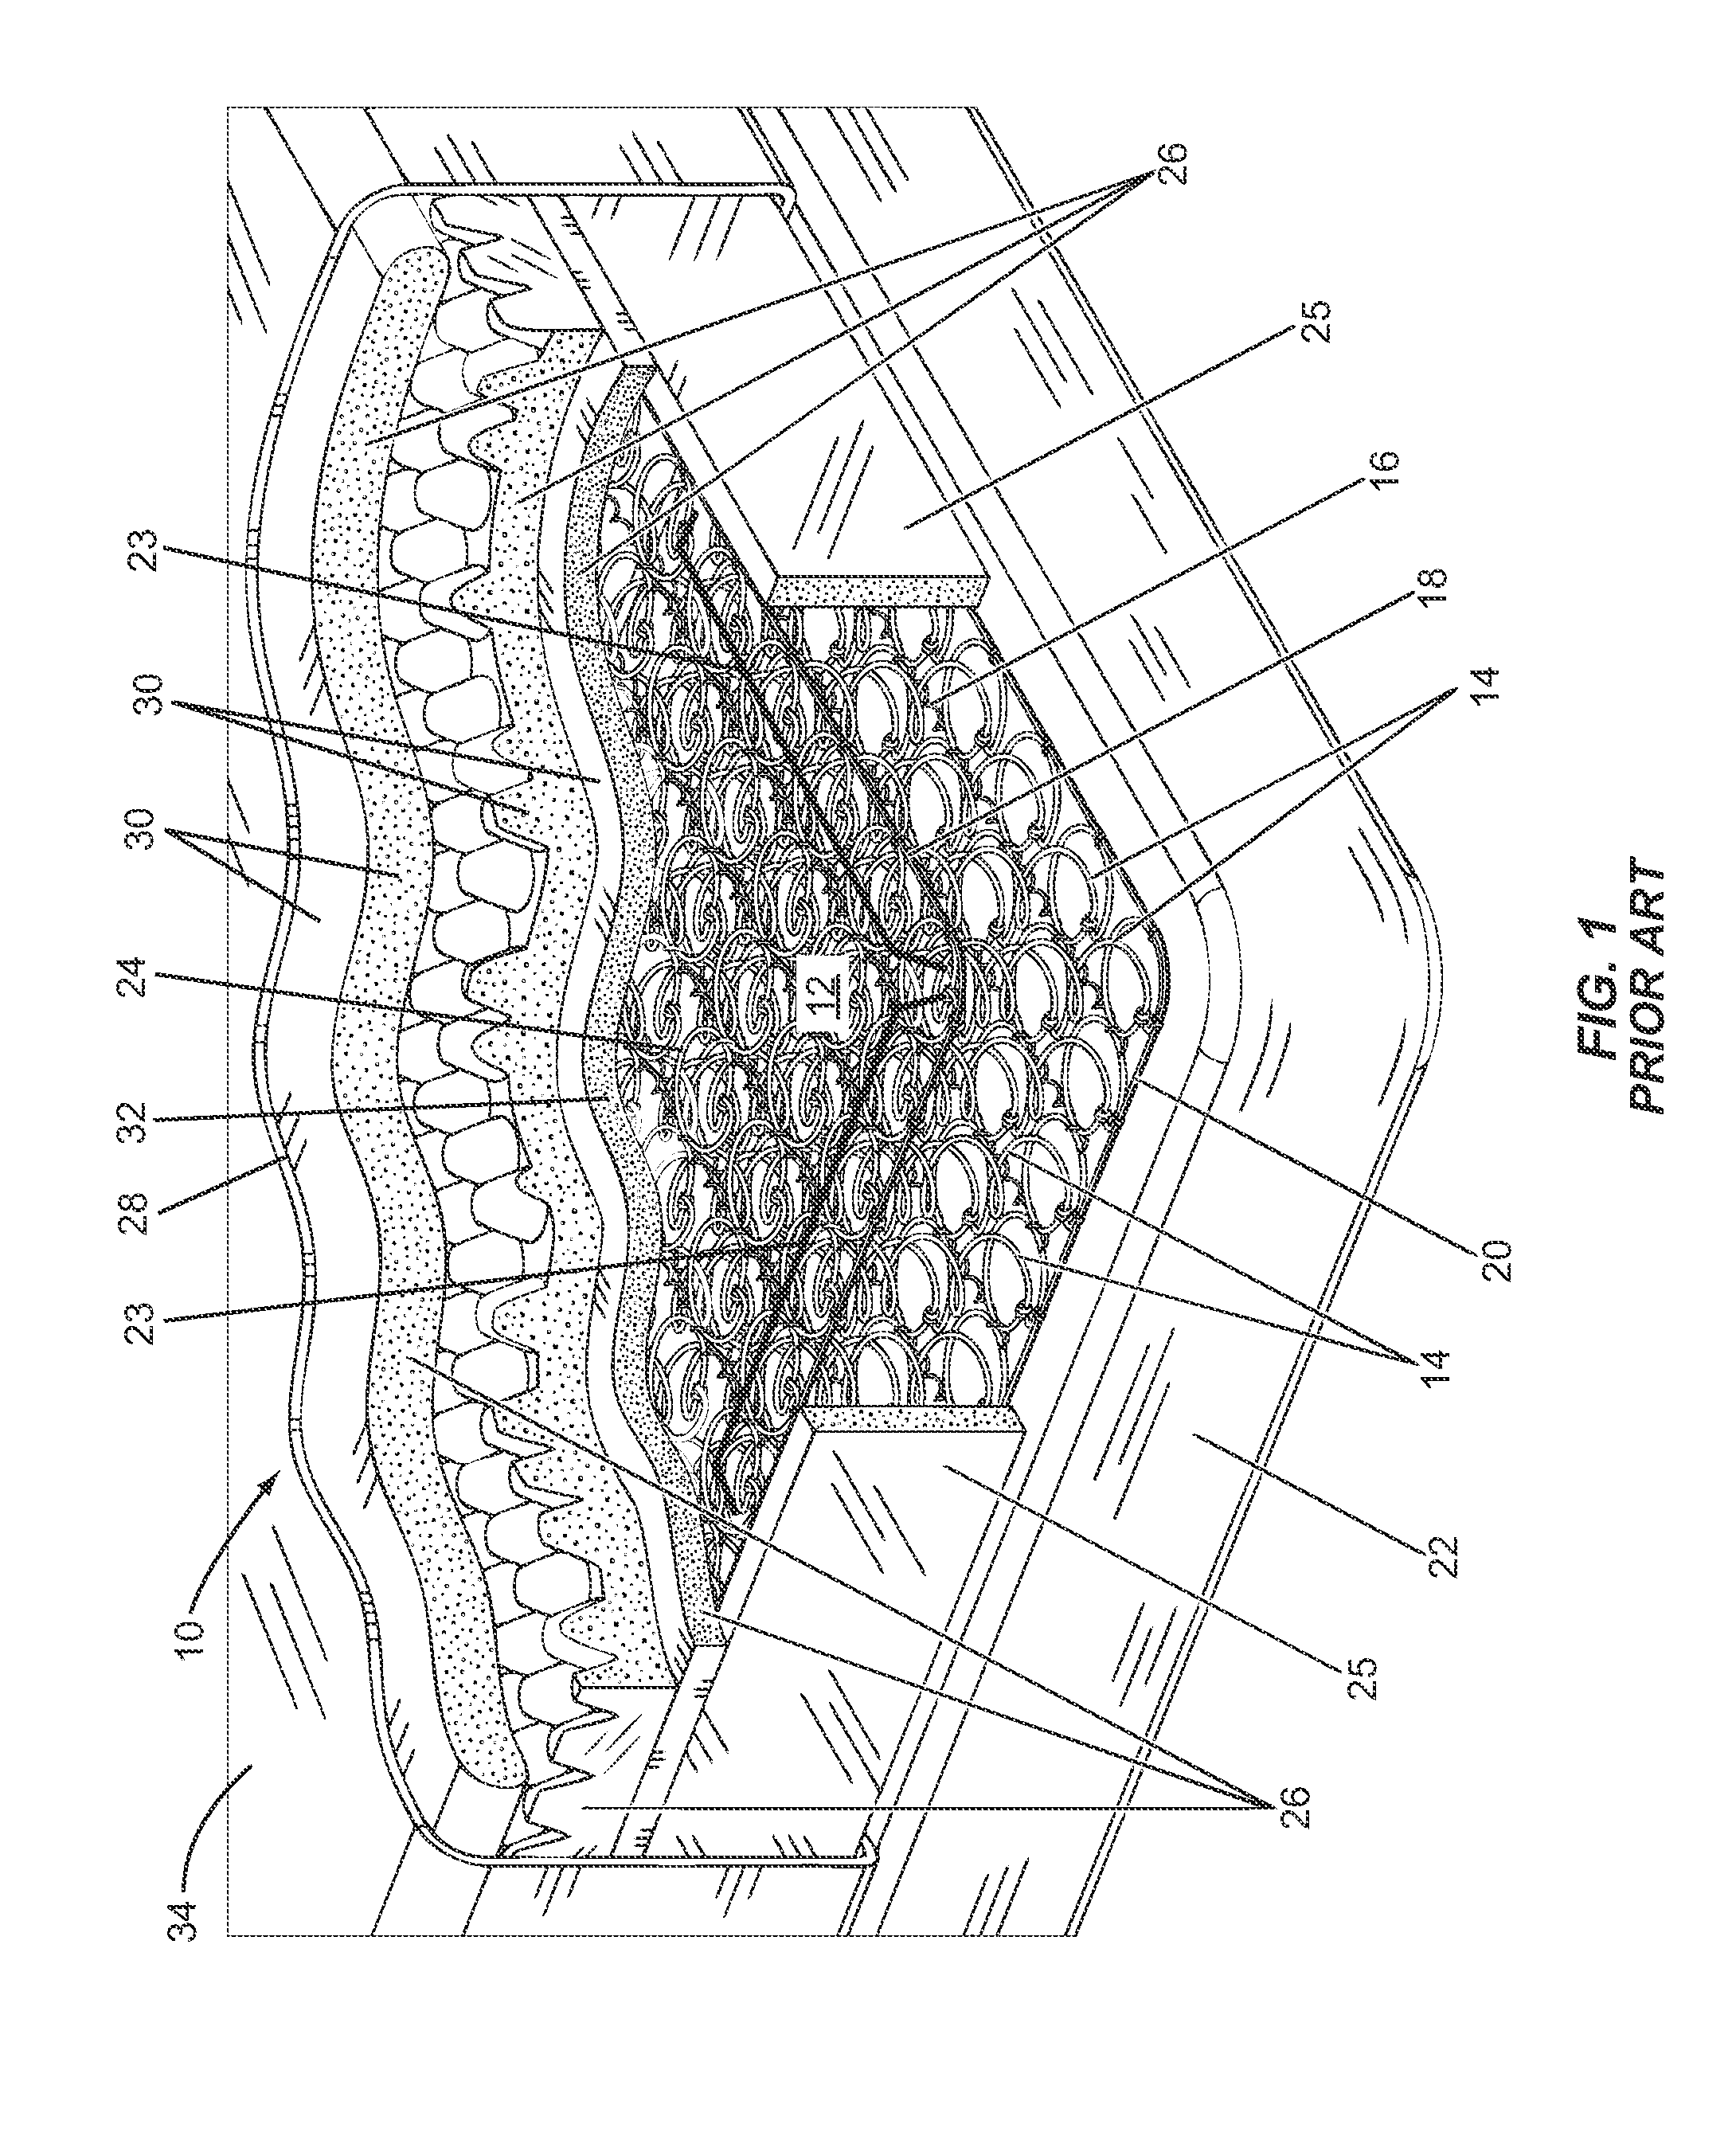 Composite cushioning structure(s) with spatially variable cushioning properties and related materials, cushioning assemblies, and methods for producing same